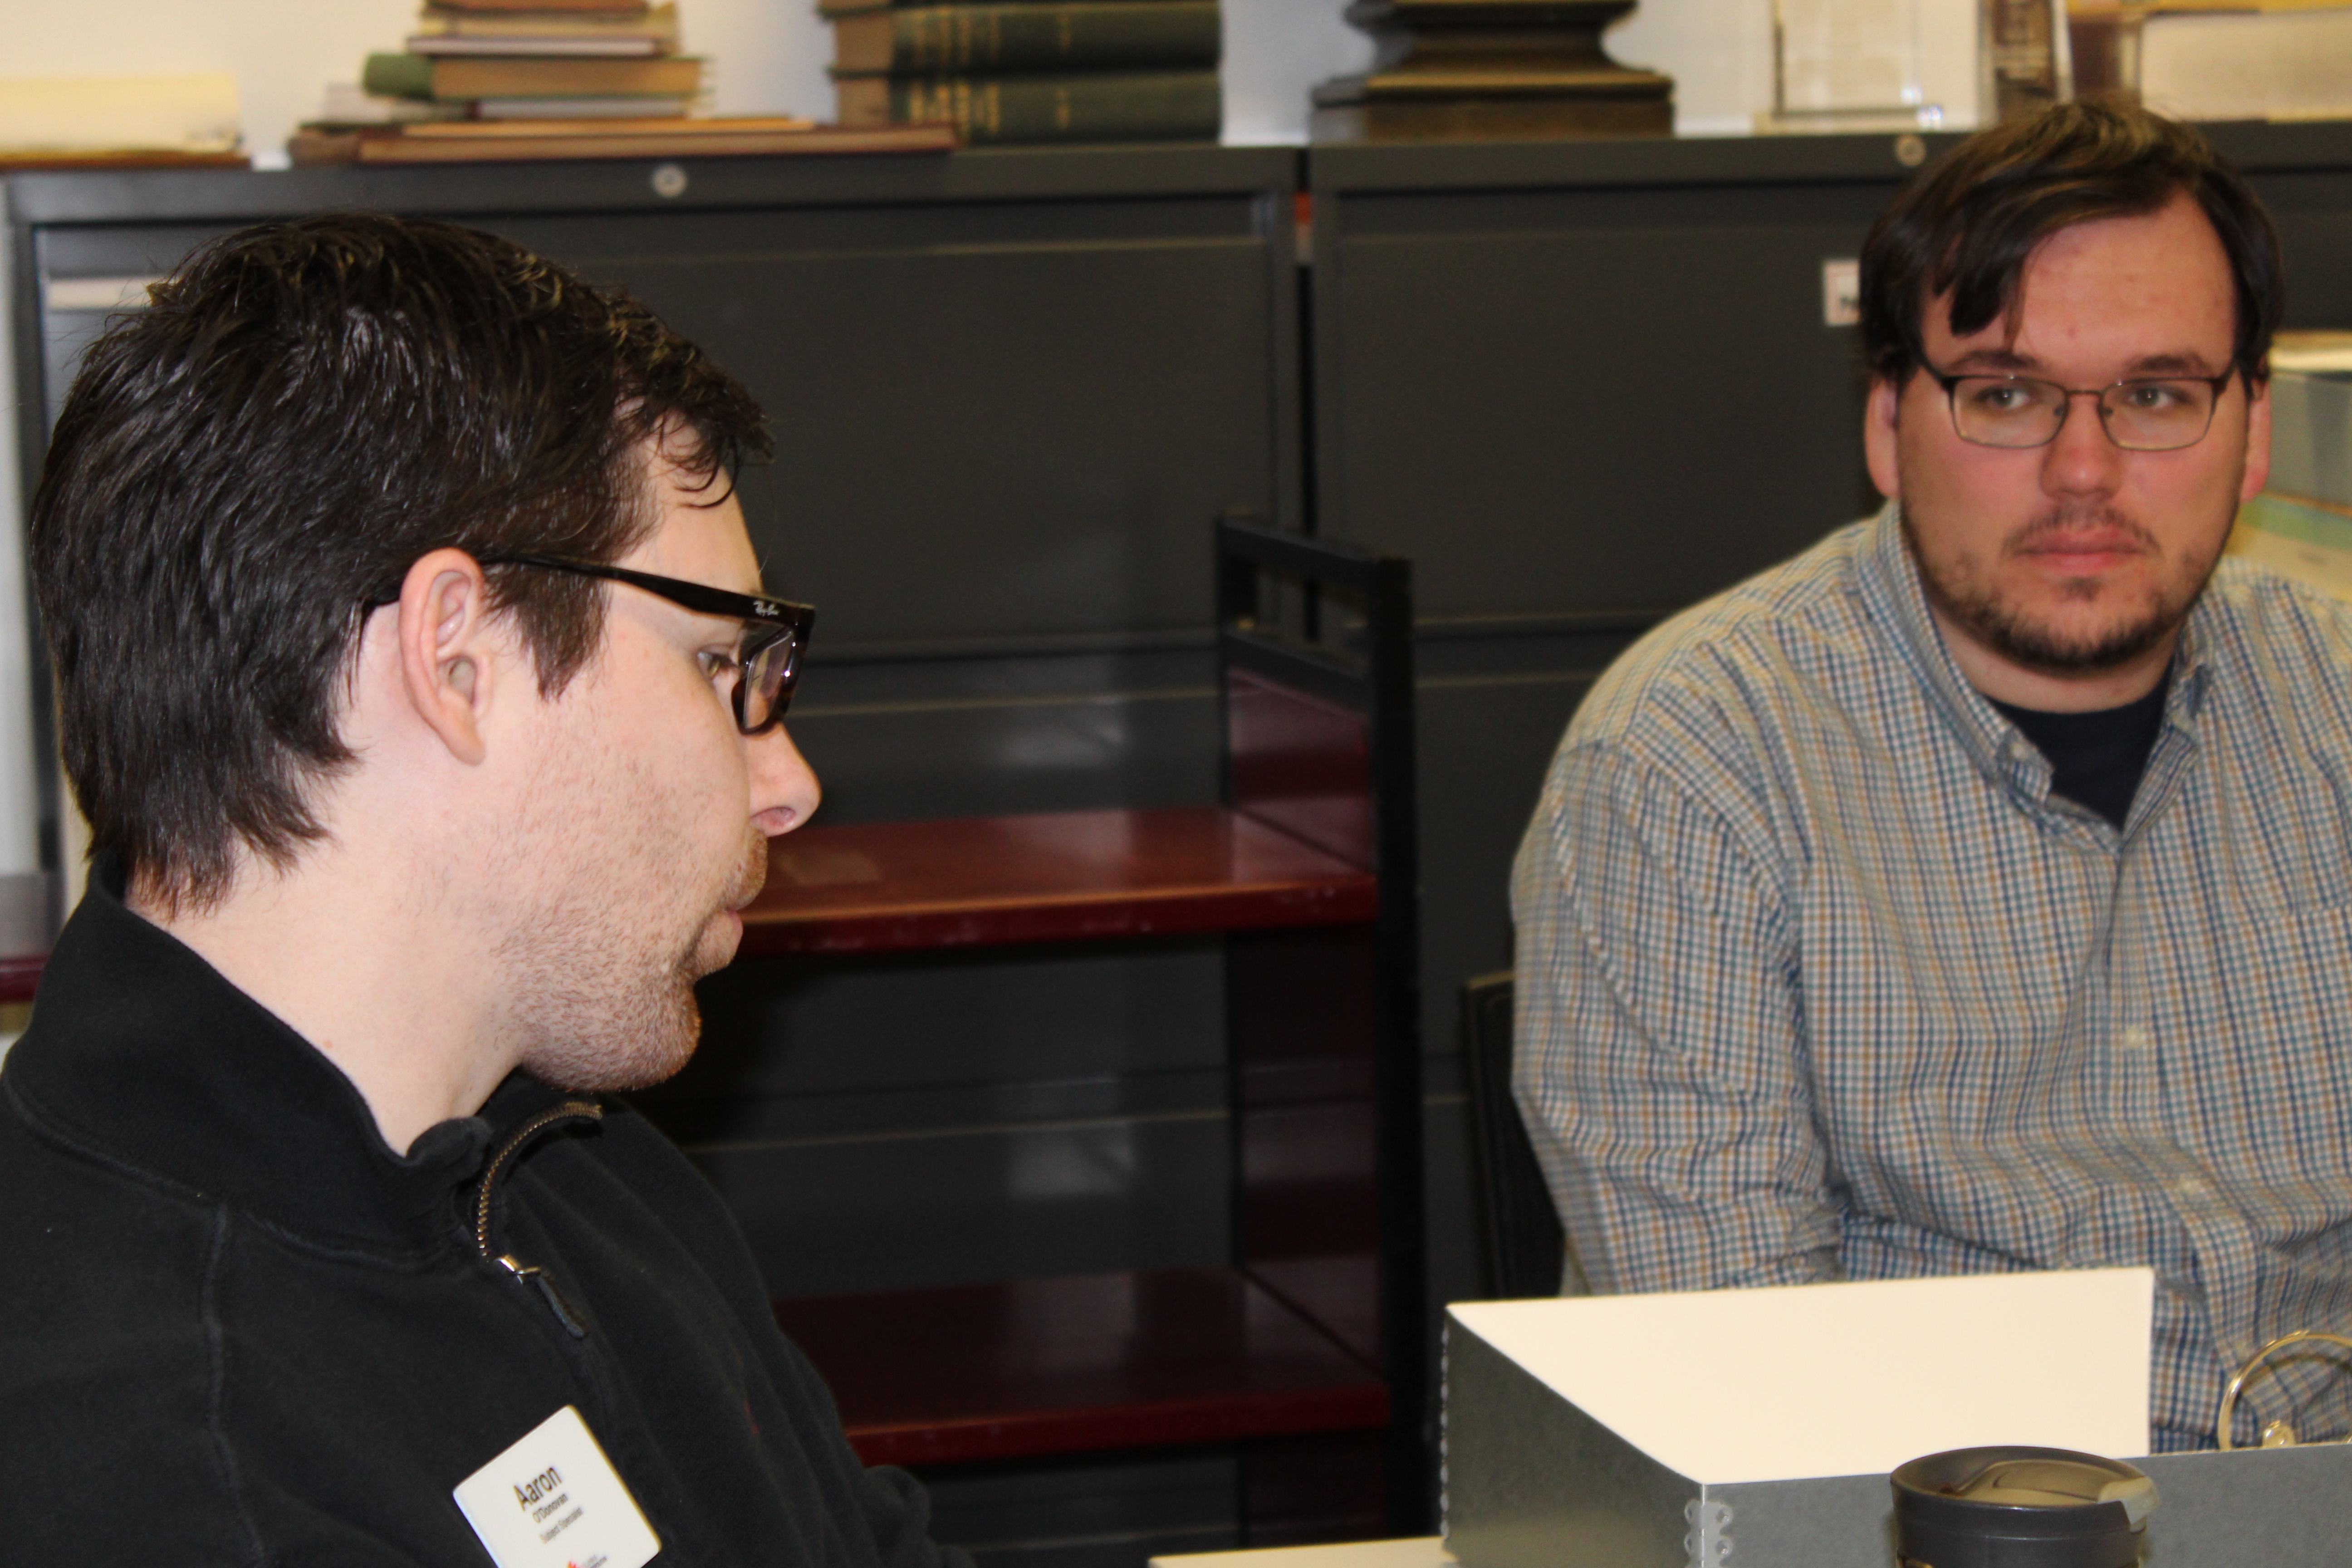 (L to R) Librarian Chuck Cody and Daniel Maharg discuss the internship project.